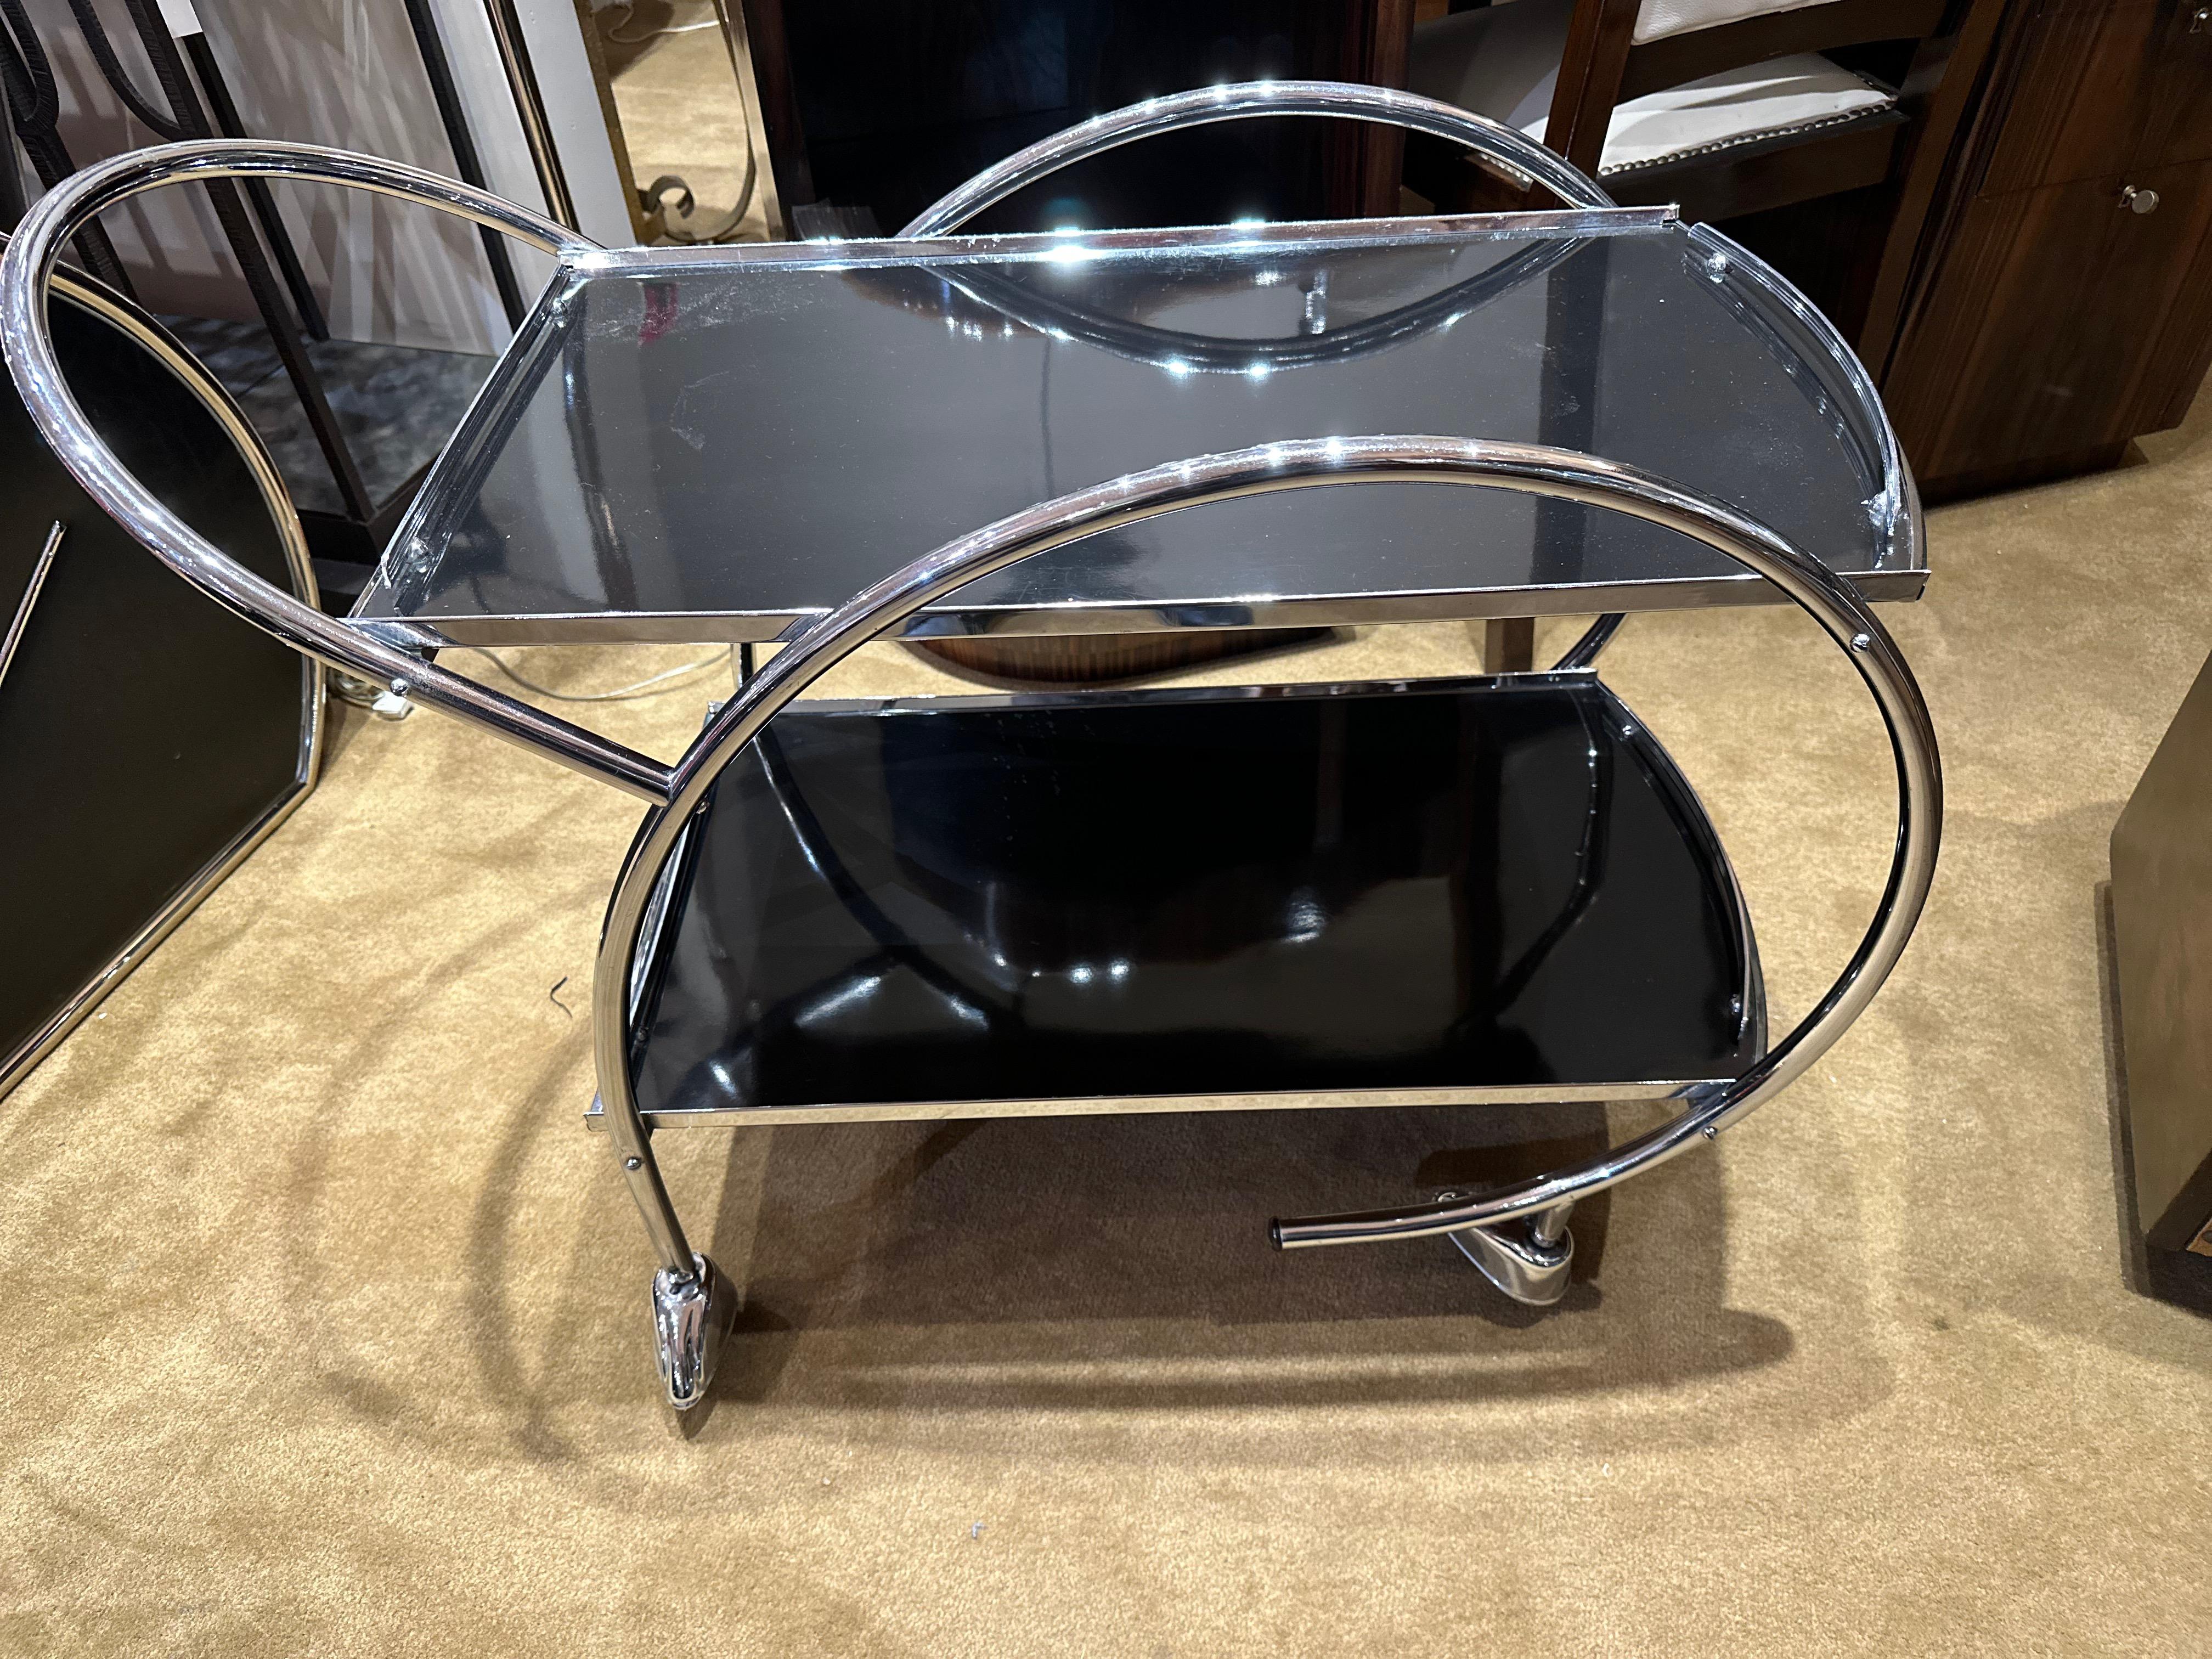 The 1930s Streamline Art Deco Chrome and Glass Hostess Trolley bar cart. This design is a little more unusual in shape than you normally find and is a lot more substantial in weight, quality, and is very sturdy. Can be used for serving drinks, and